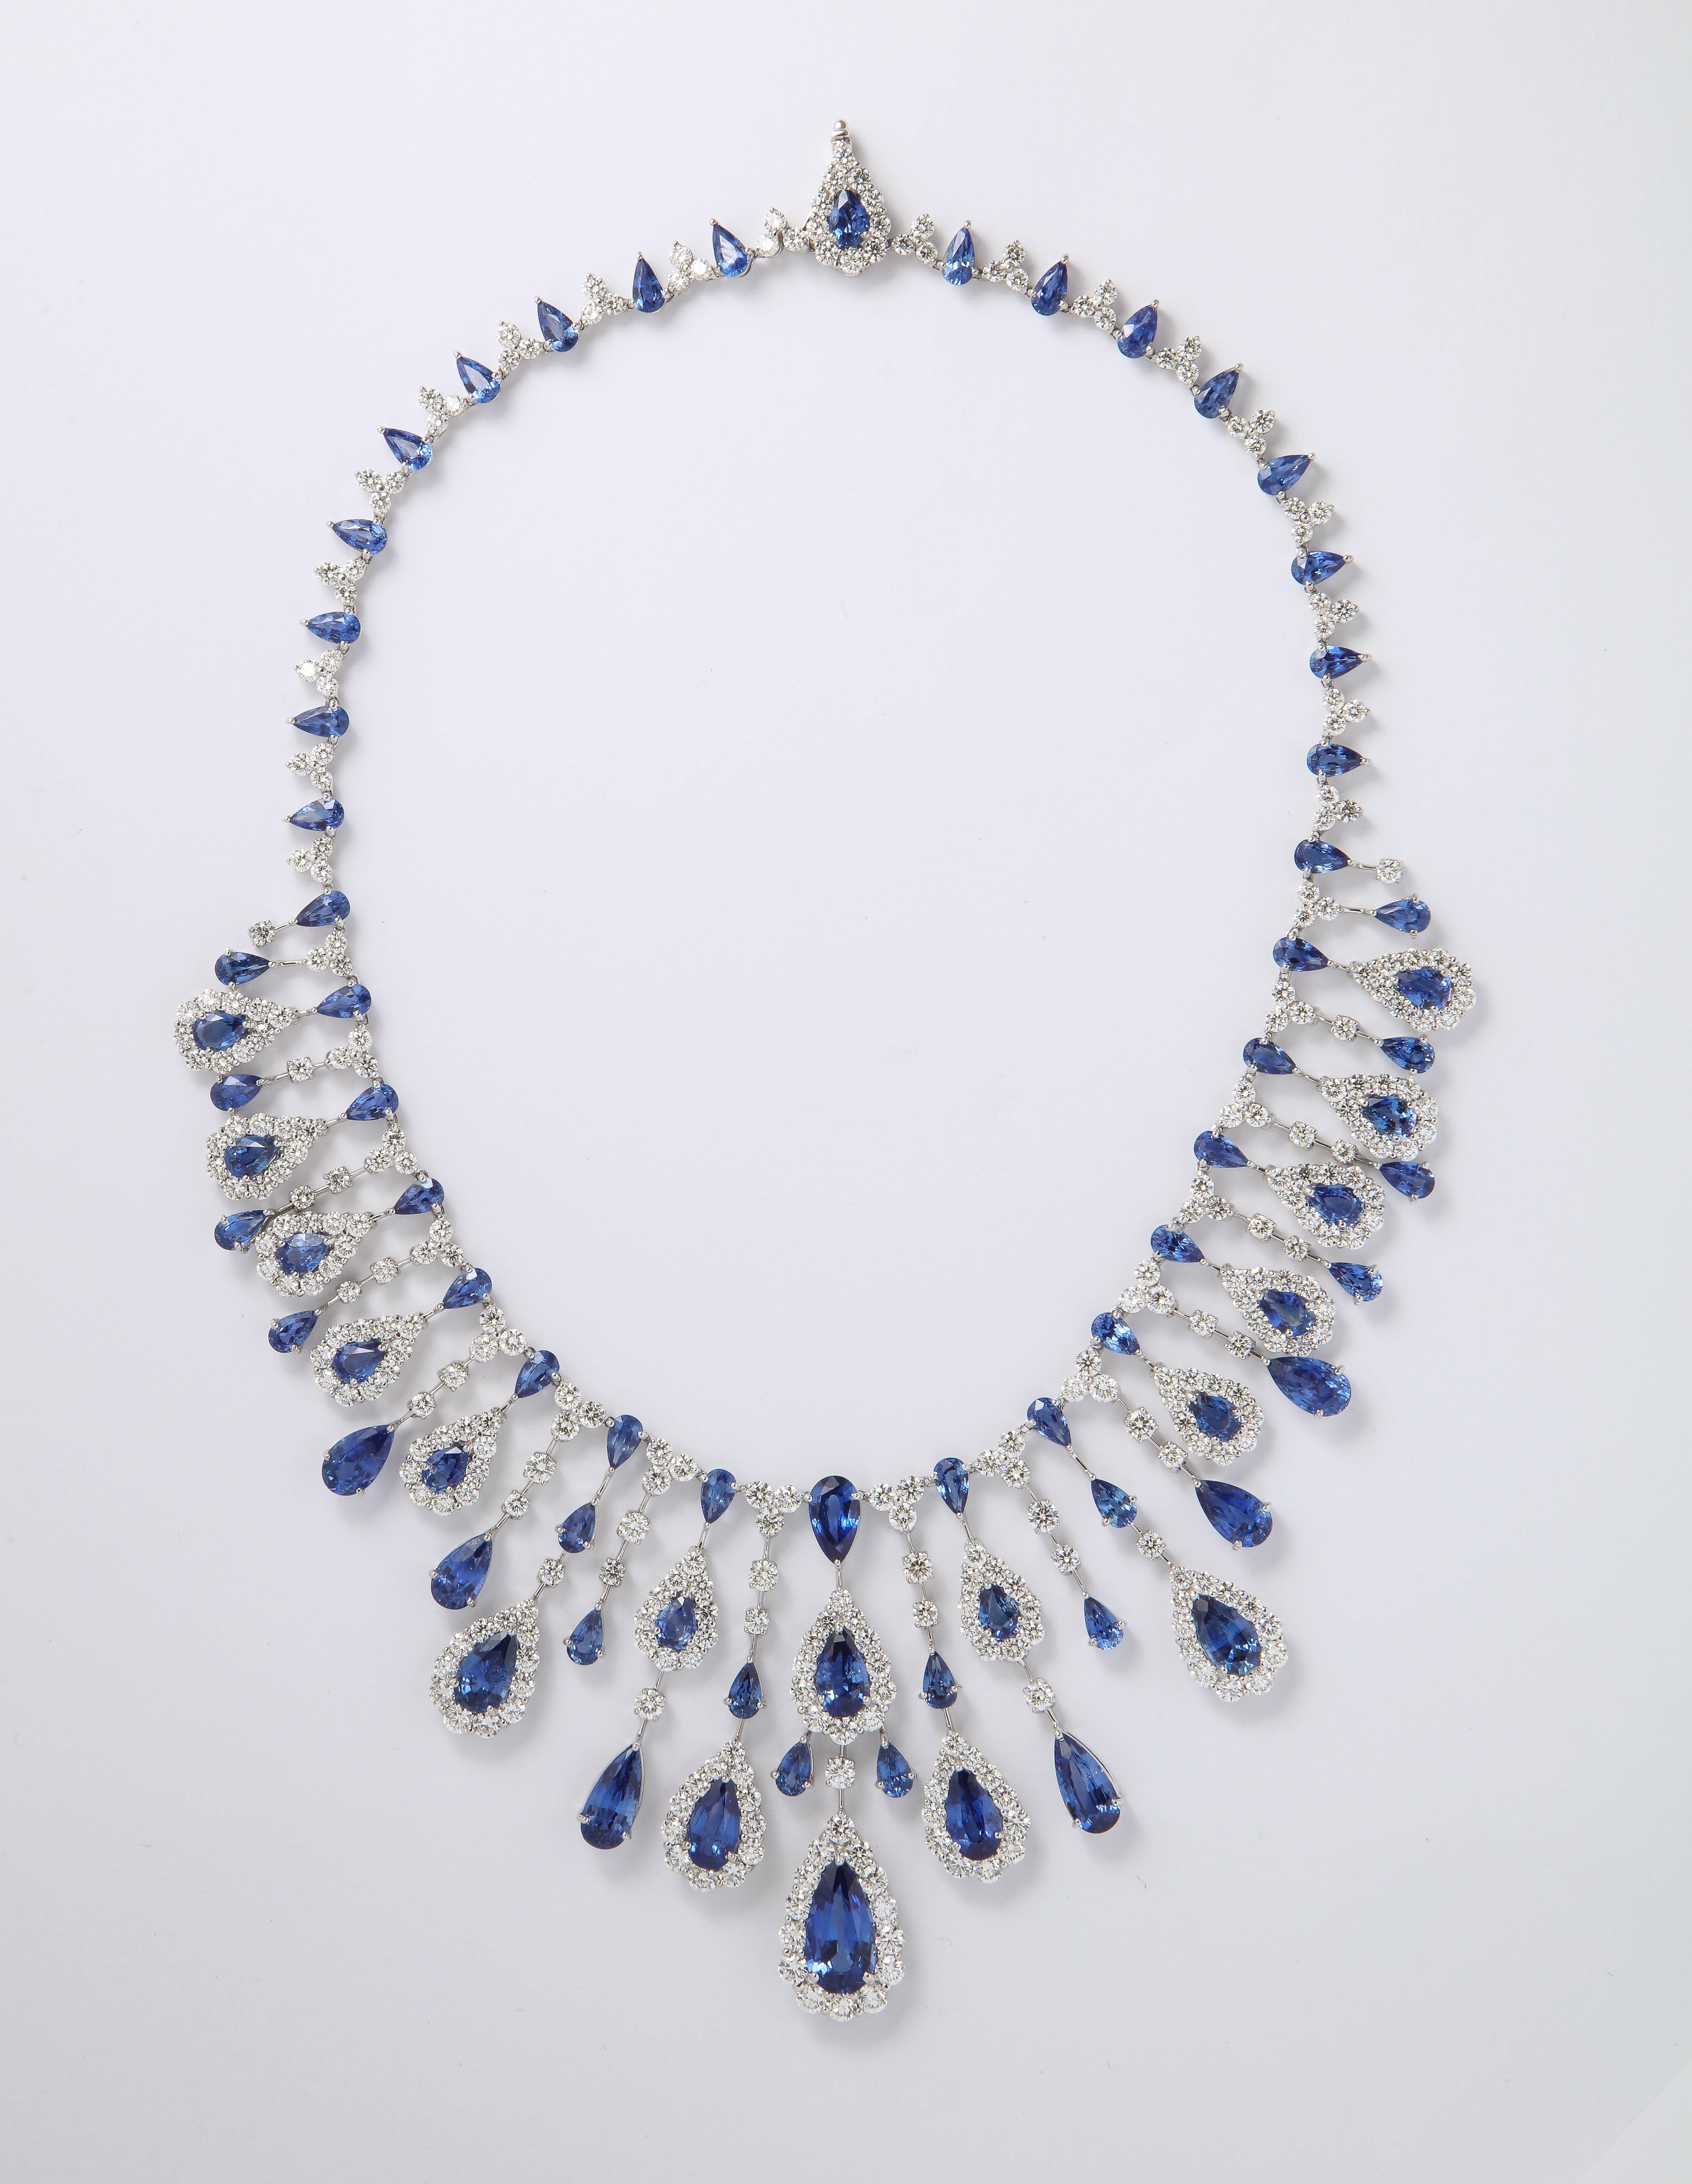 
A GRAND piece. 

77.40 carats of fine Ceylon Blue Sapphires
36.01 carats of white round brilliant cut diamonds. 

18k white gold 

2.5 inch long center drop, 16.5 inch length that can be adjusted. 